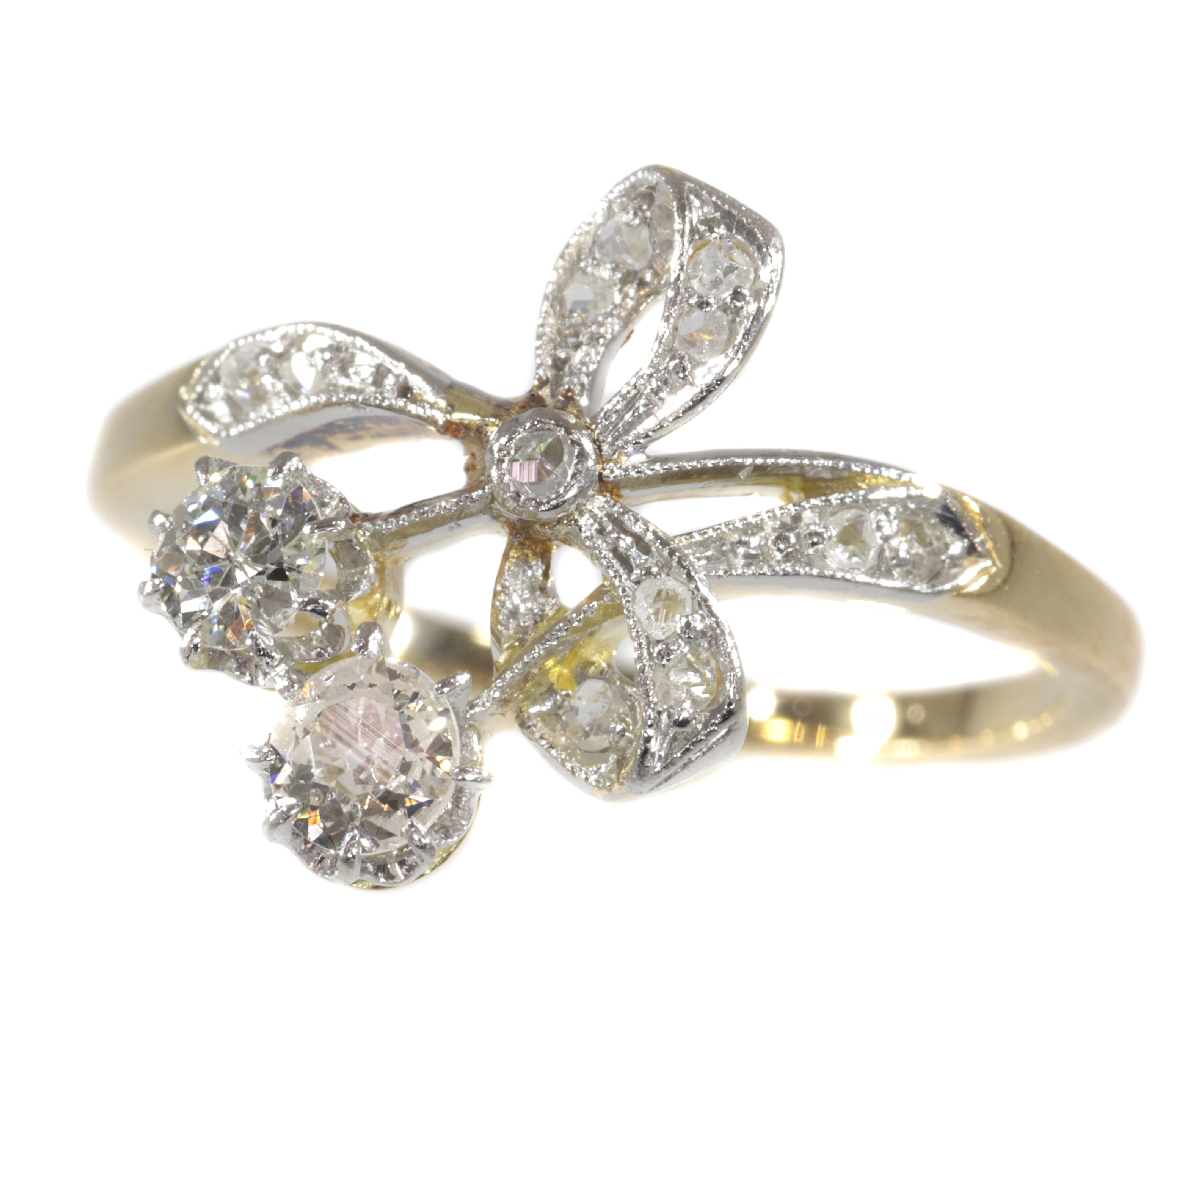 Charming Belle Epoque ring with diamonds